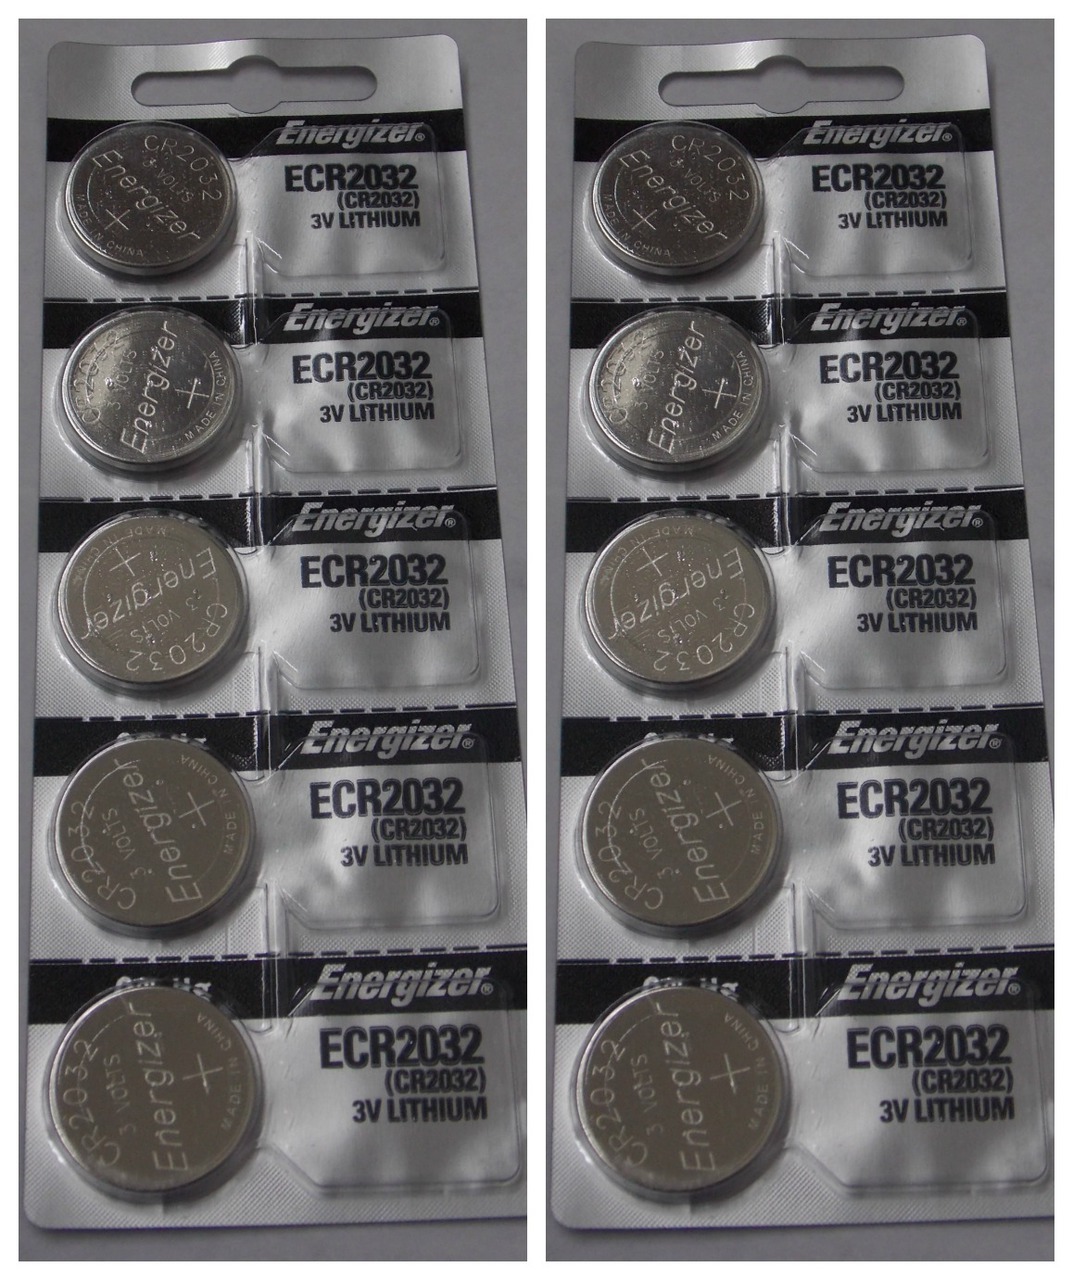 Energizer CR2032 3V Lithium Coin Battery - 10 Pack + FREE SHIPPING